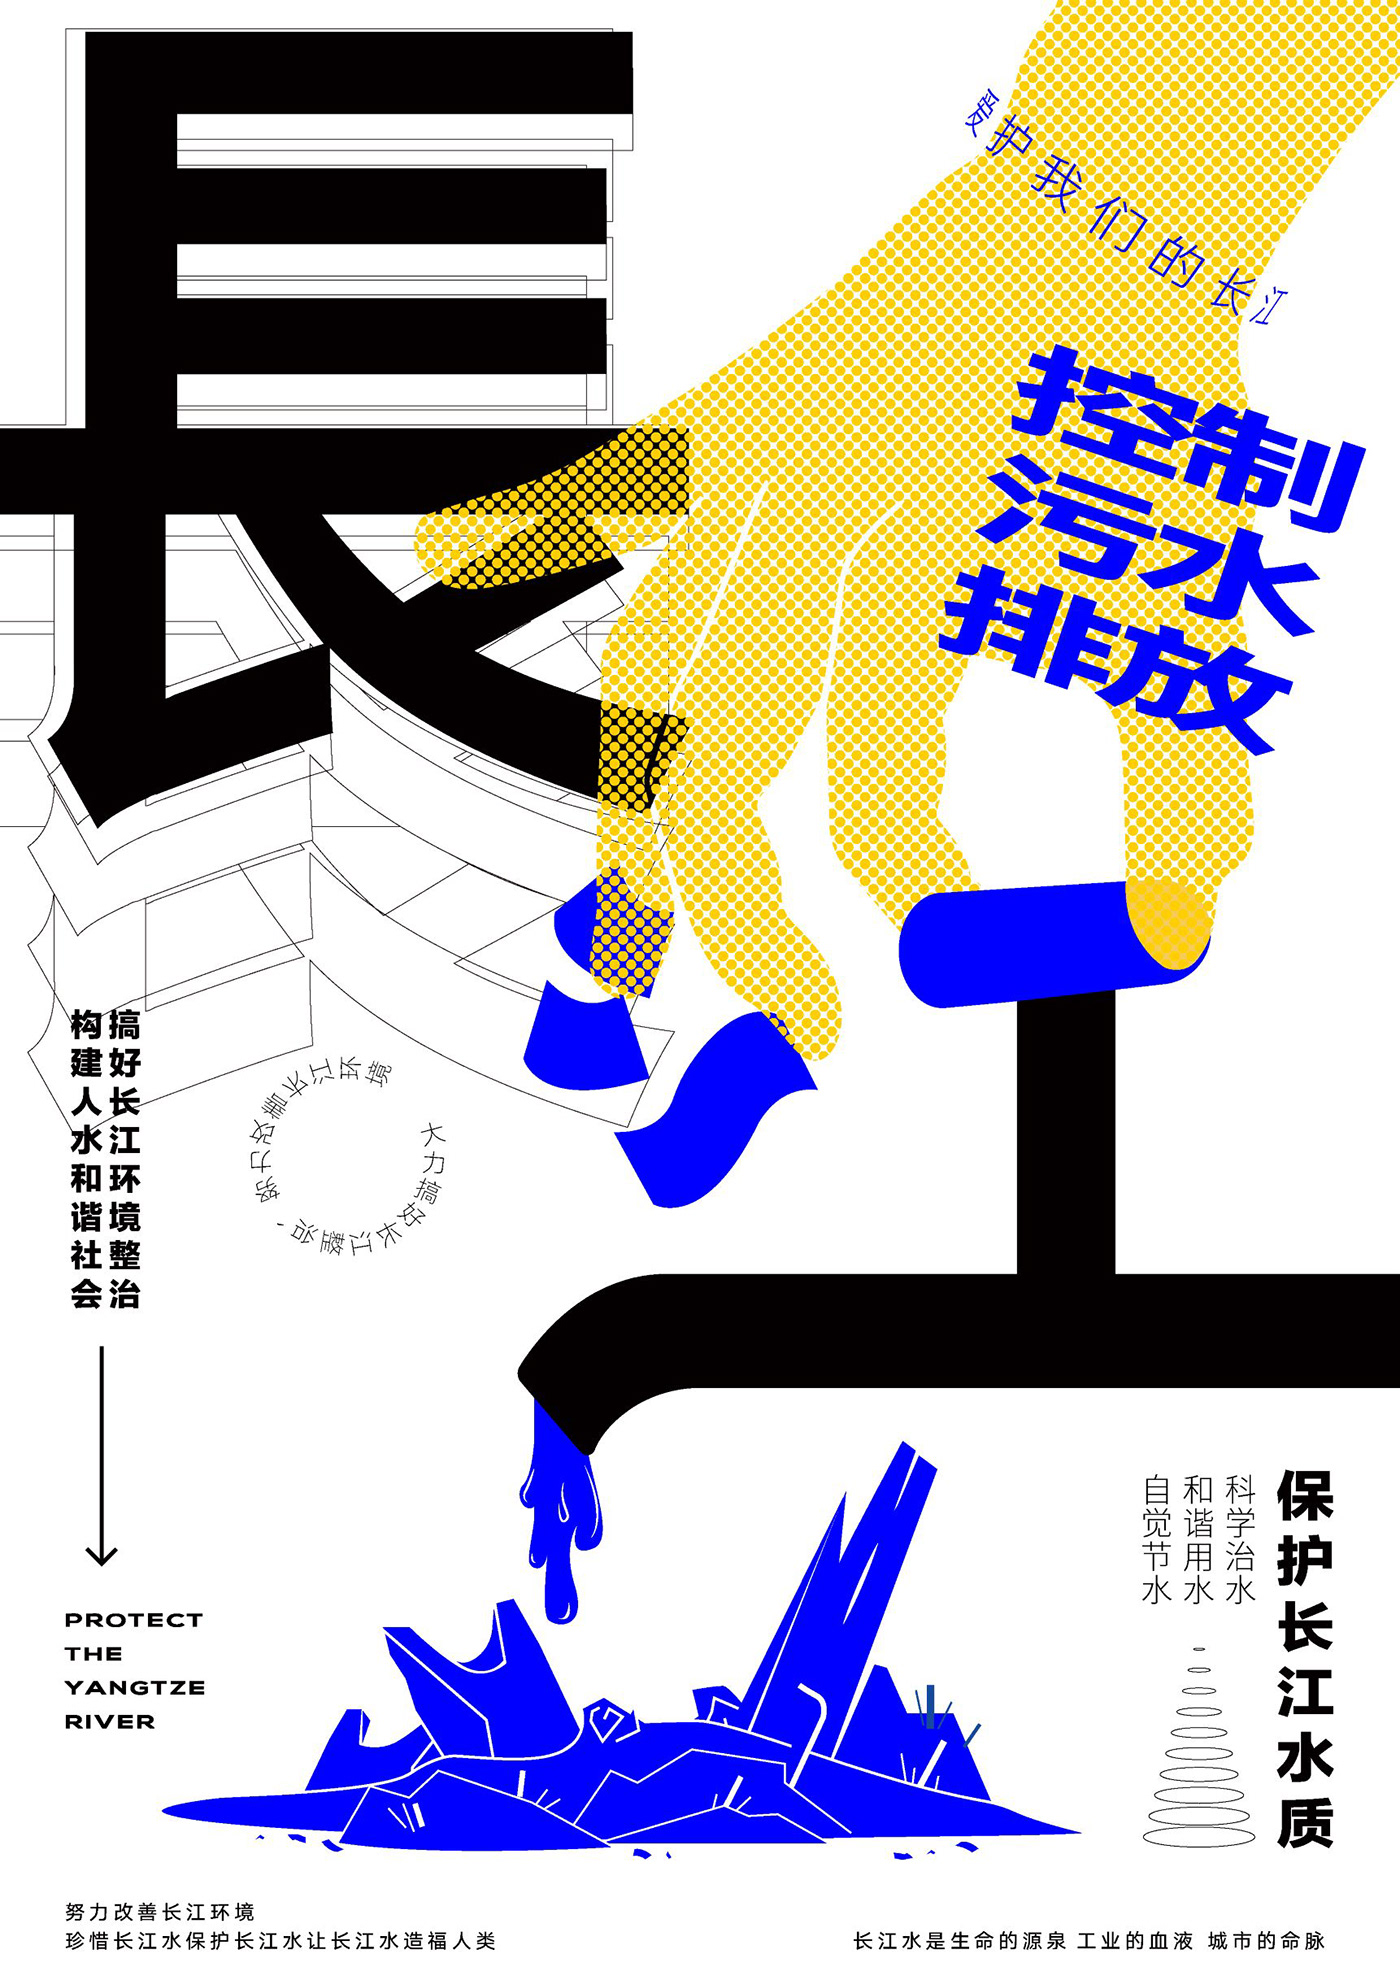 graphic graphic design  ILLUSTRATION  poster Poster Design Typeface typography   Layout 排版 海报